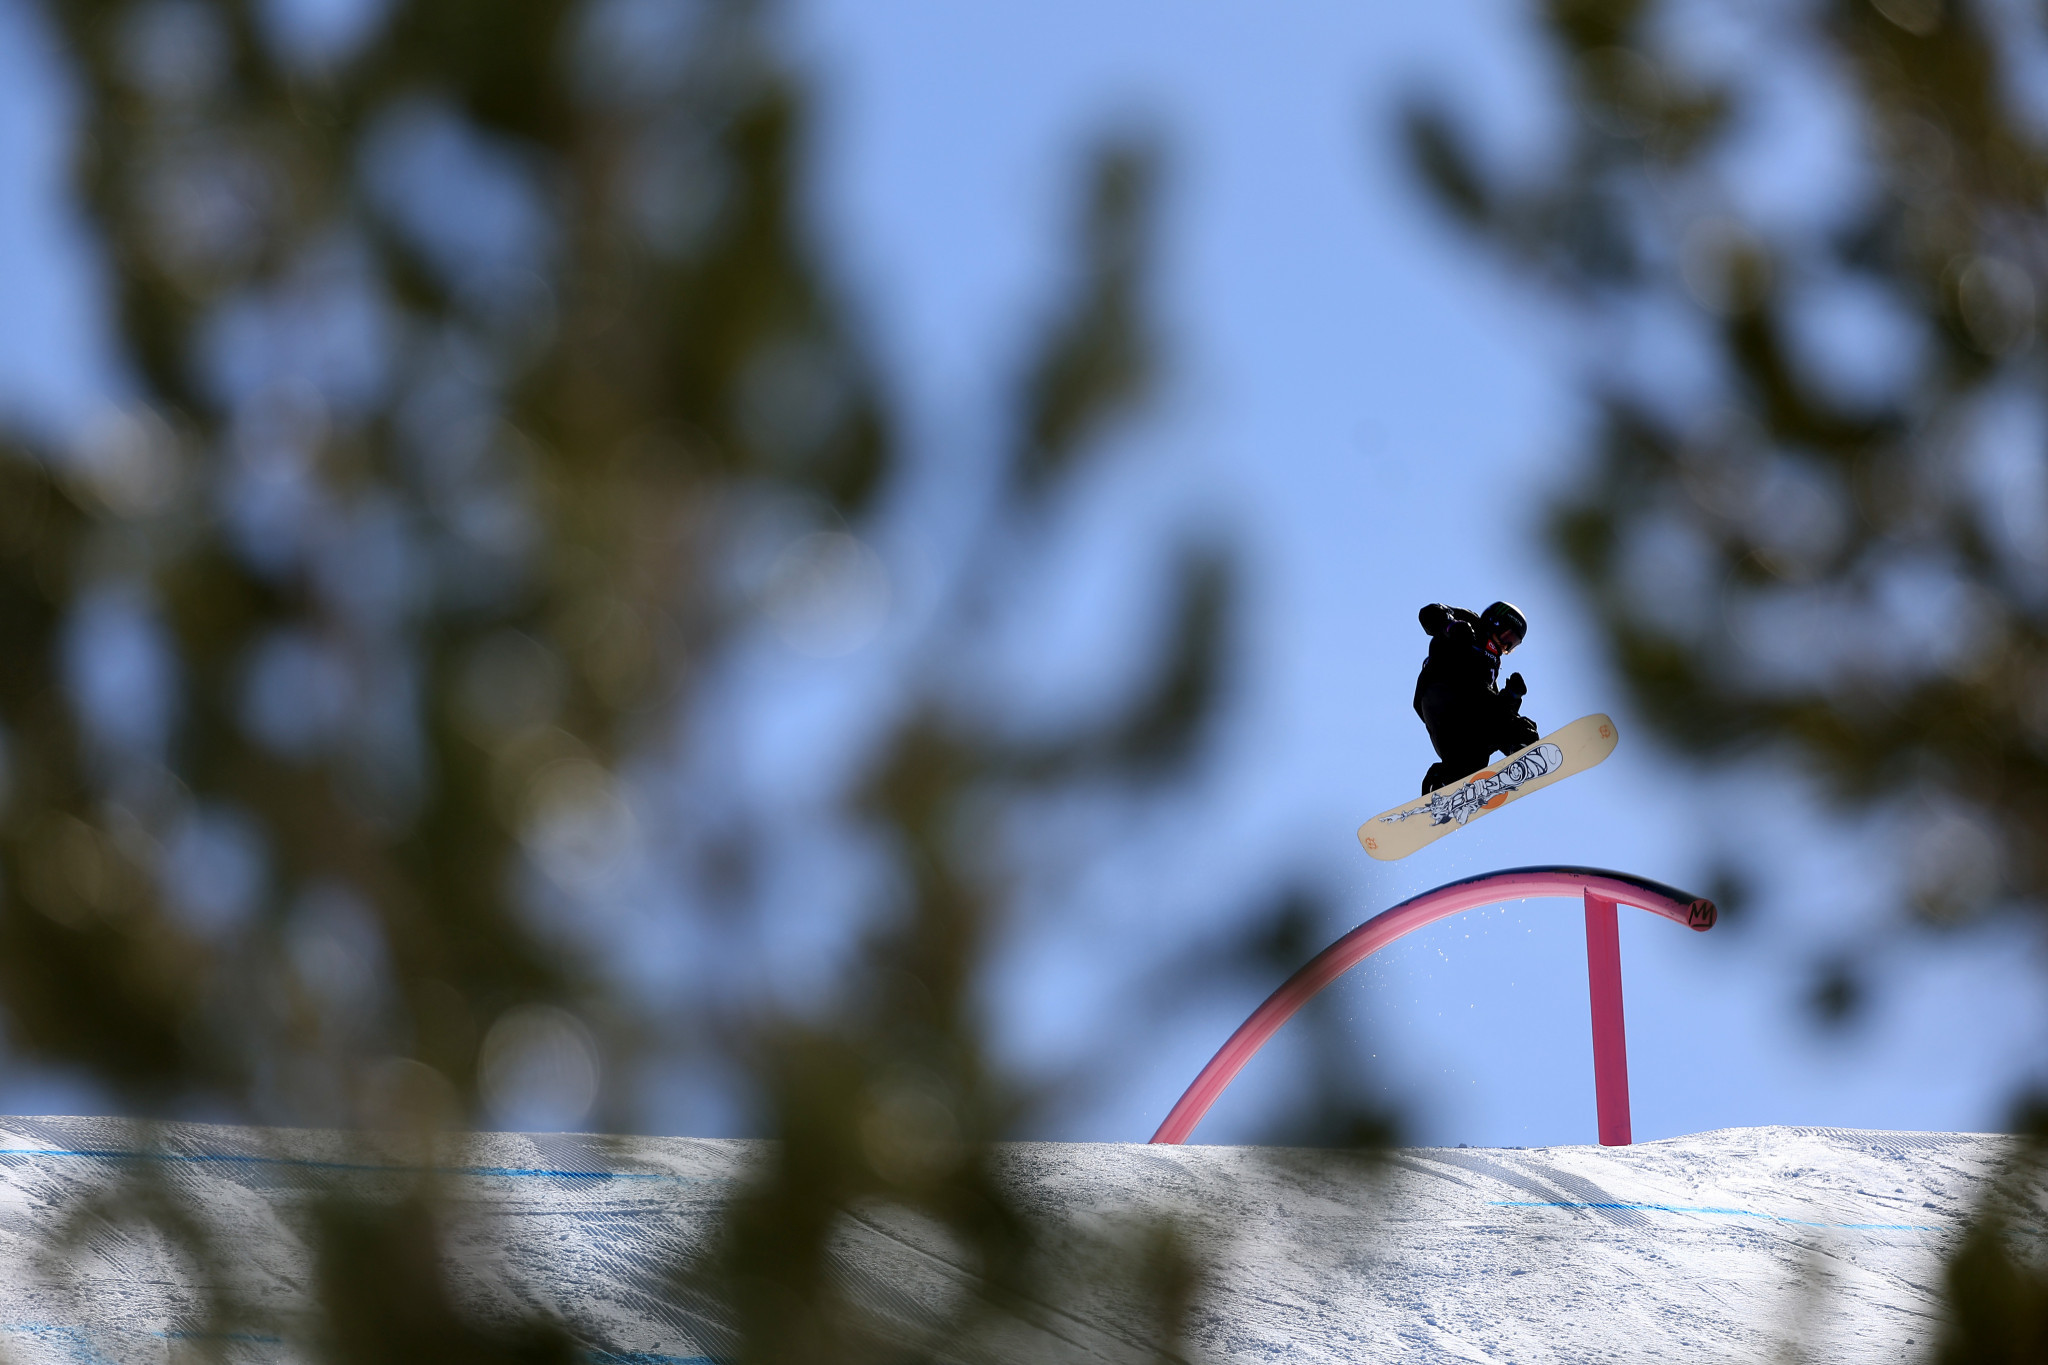 Taiga Hasegawa of Japan earned his first Snowboard World Cup victory in the slopestyle discipline ©Getty Images